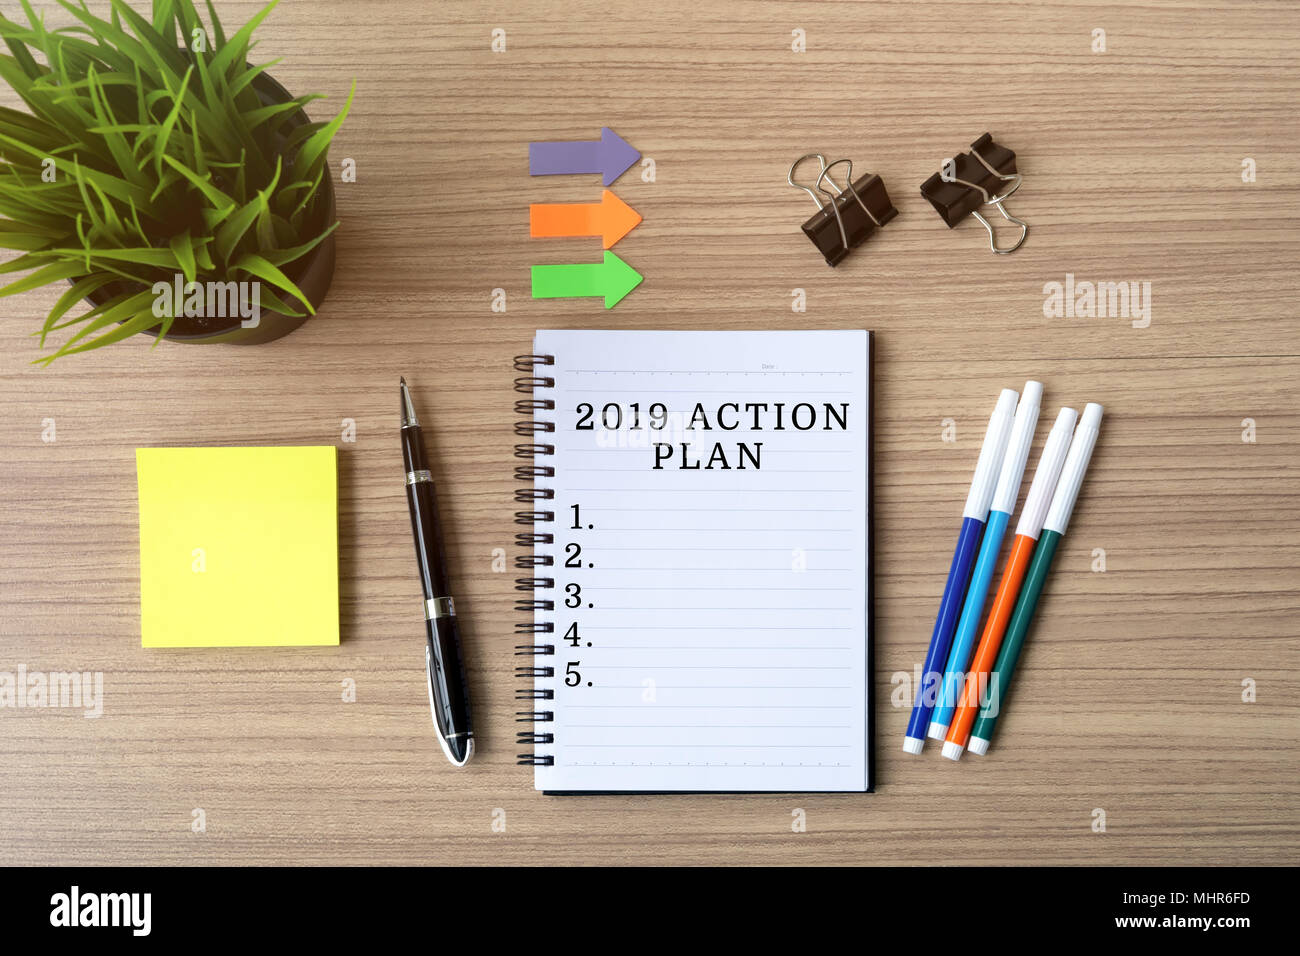 2019 Action Plan on notepad, flat lay business office desk. Stock Photo